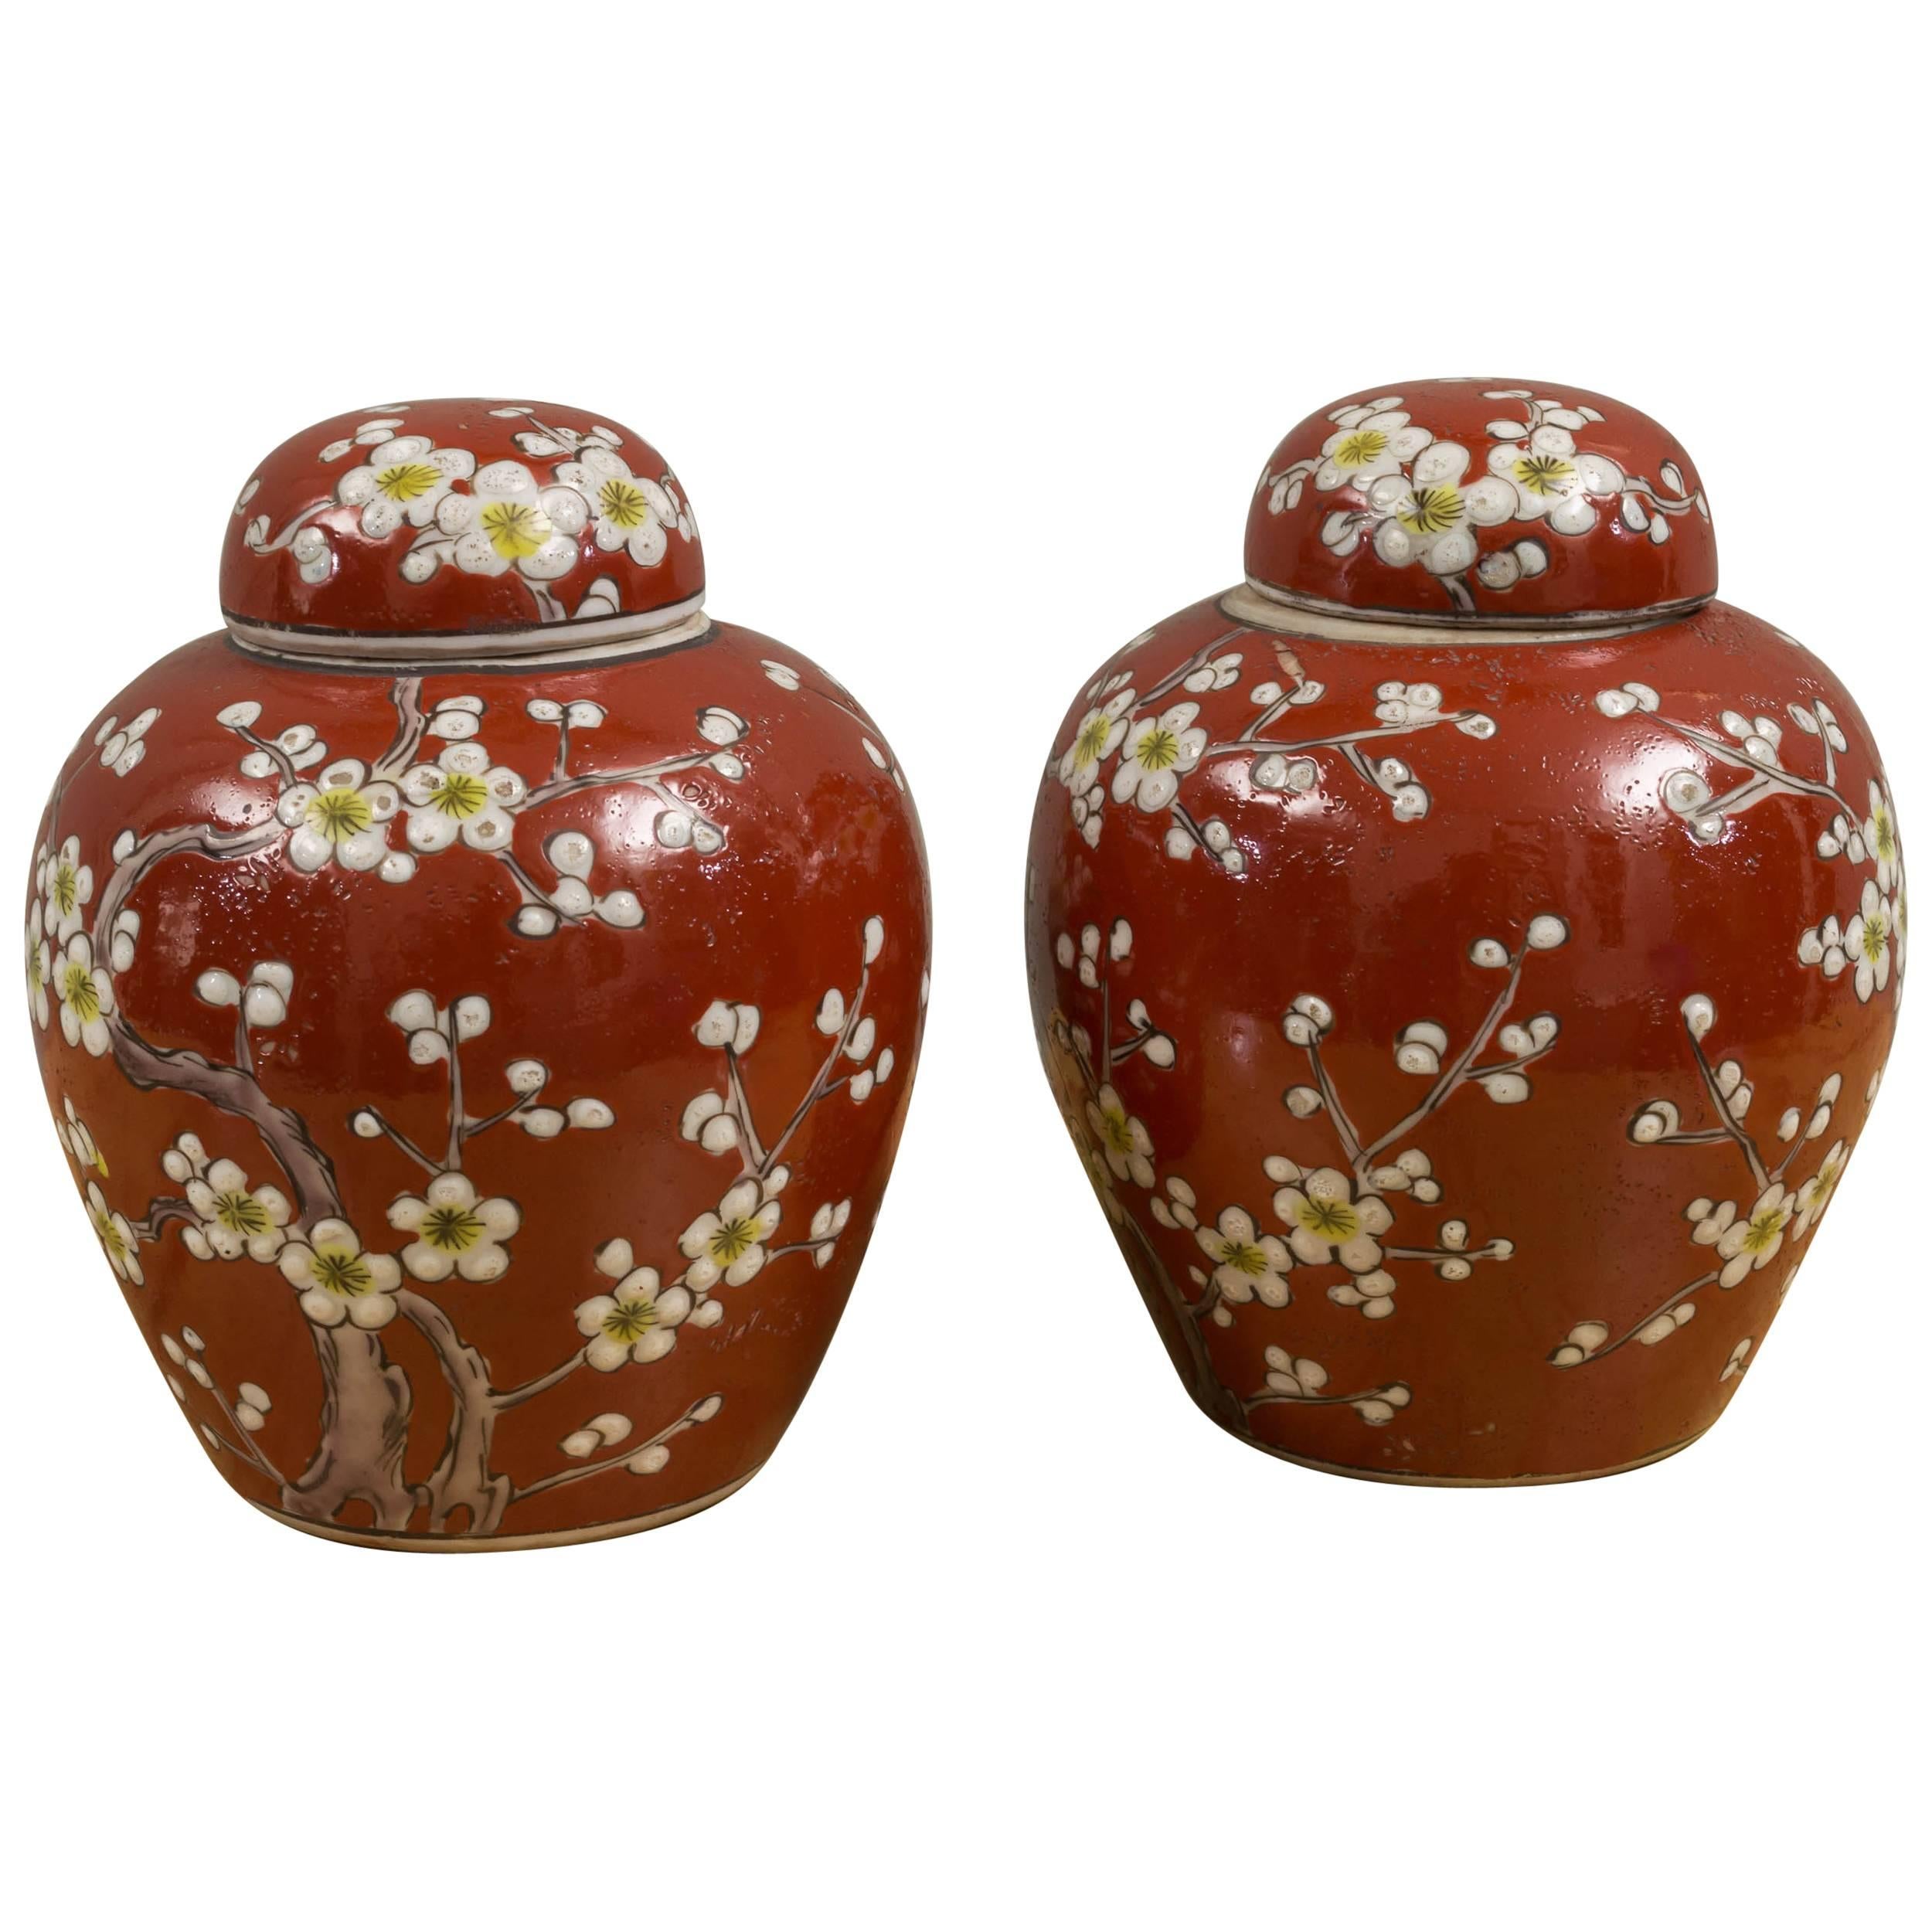 Pair of Japanese Covered Urns For Sale